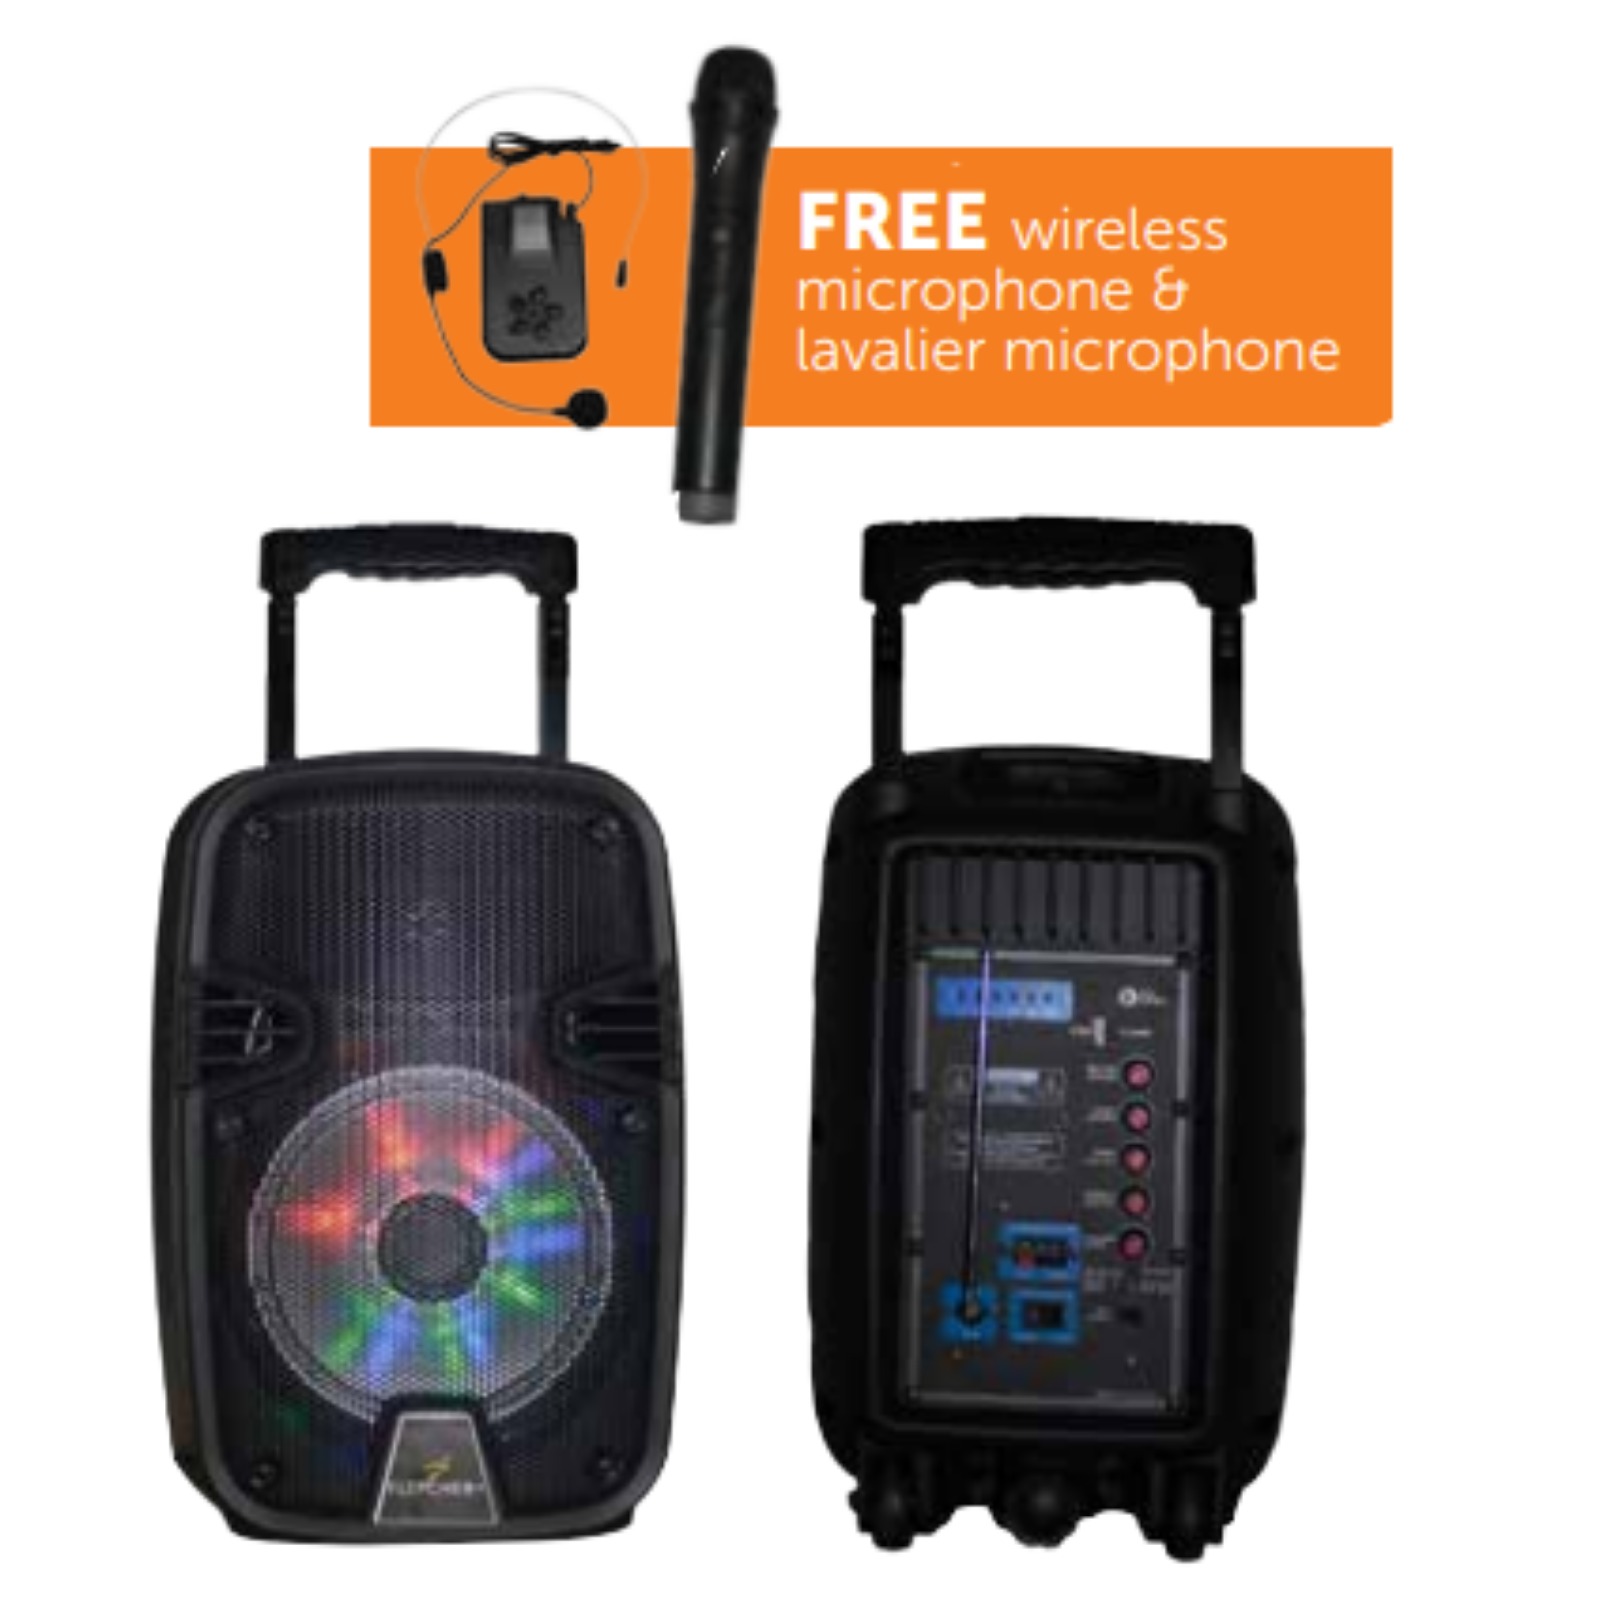 FLEPCHER PPA-0835 8INCH 35-WATT PORTABLE PA SYSTEM WITH 1 WIRELESS MICROPHONE, 1 LAVALIER MICROPHONE, FLEPCHER, WIRELESS MICROPHONE SYSTEM, flepcher-wireless-microphone-system-ppa-0835, ZOSO MUSIC SDN BHD